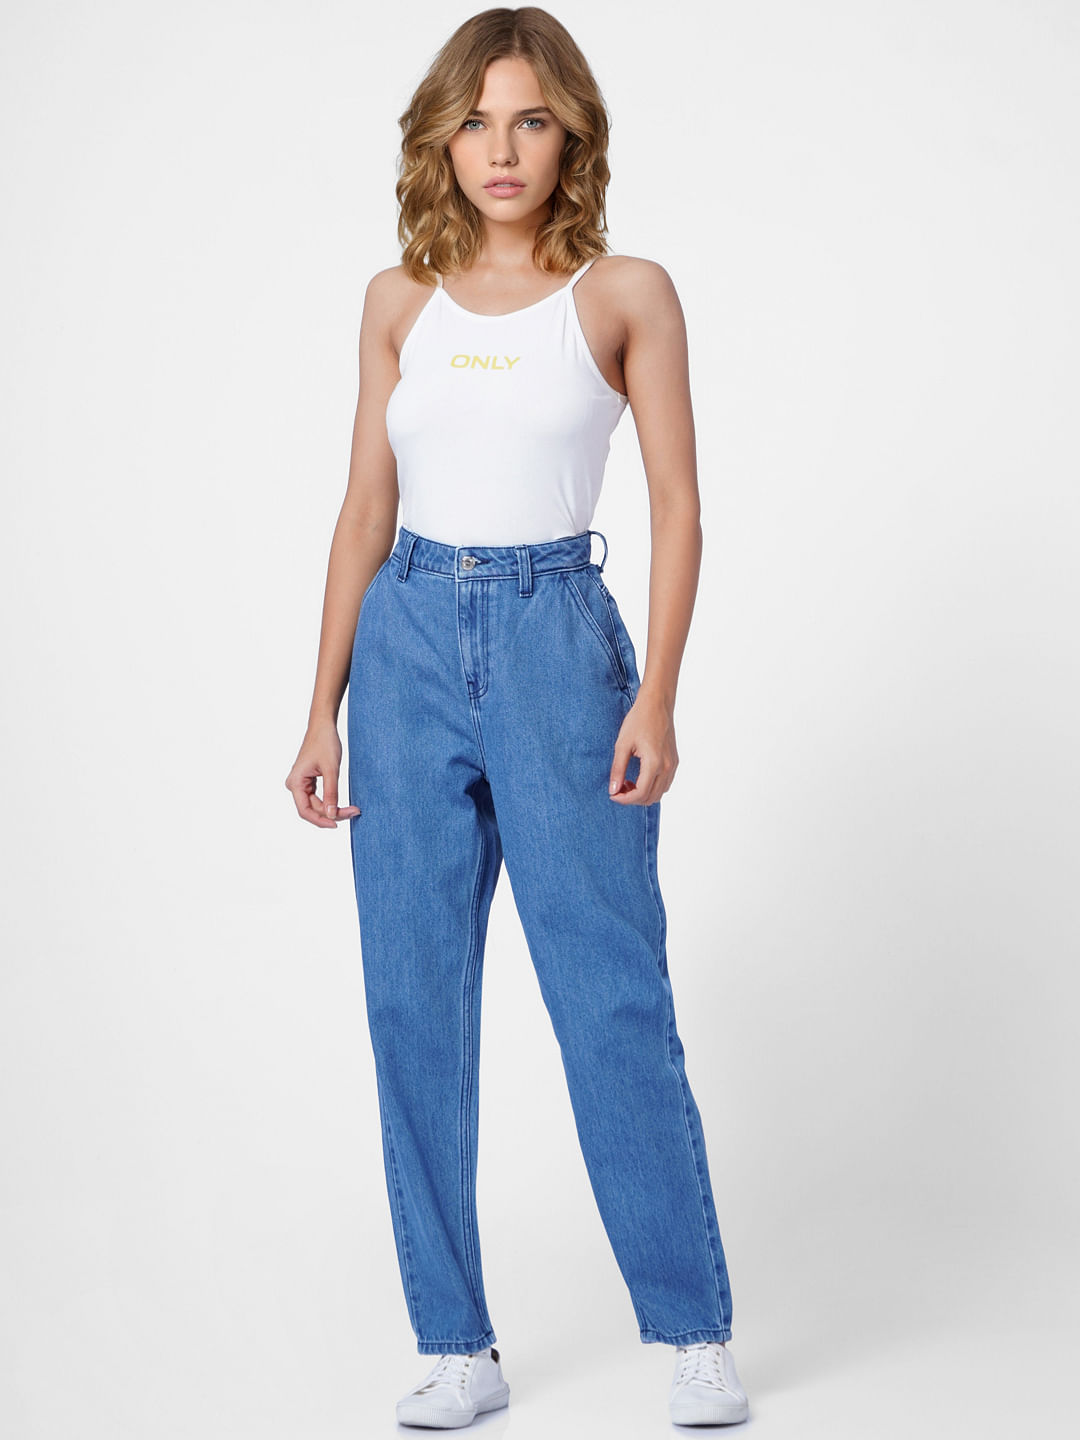 7 For All Mankind Ease Dylan Sign Boyfriend Jeans - Farfetch